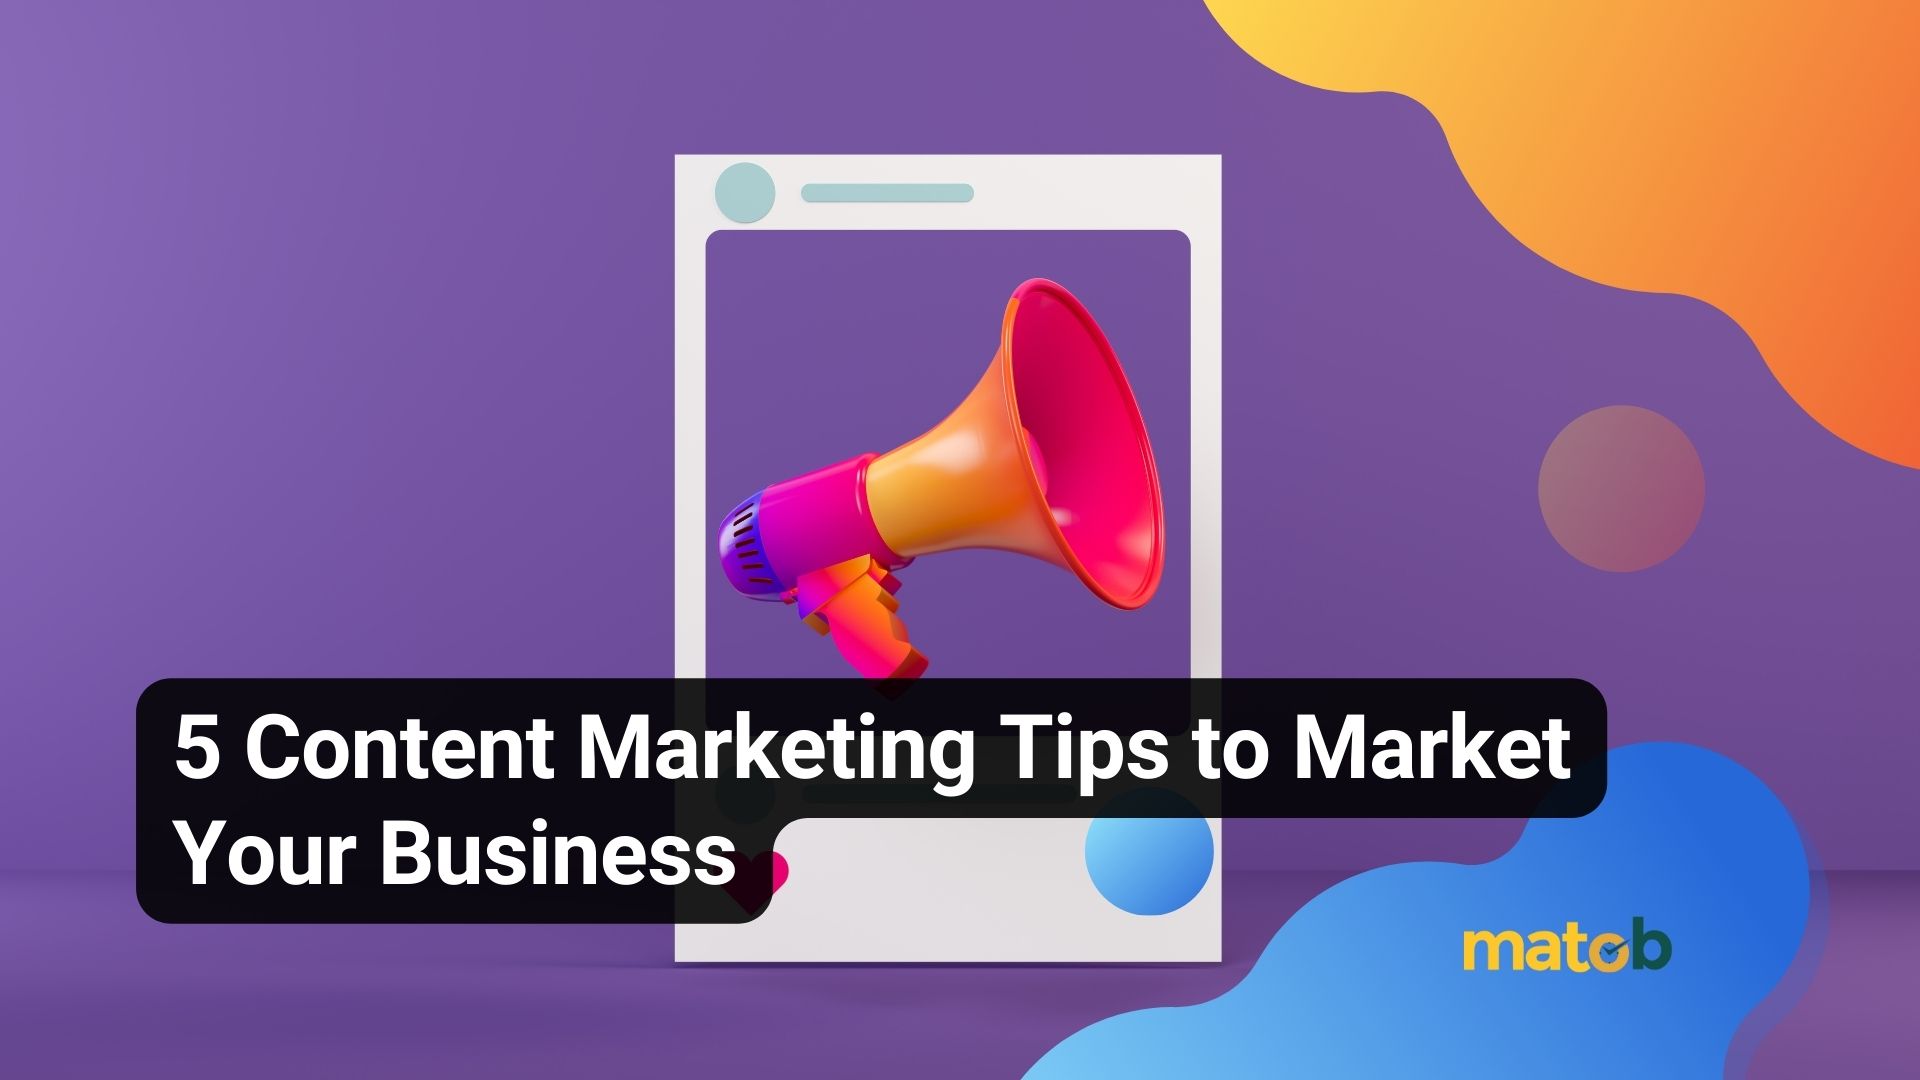 5 Content Marketing Tips to Market Your Business